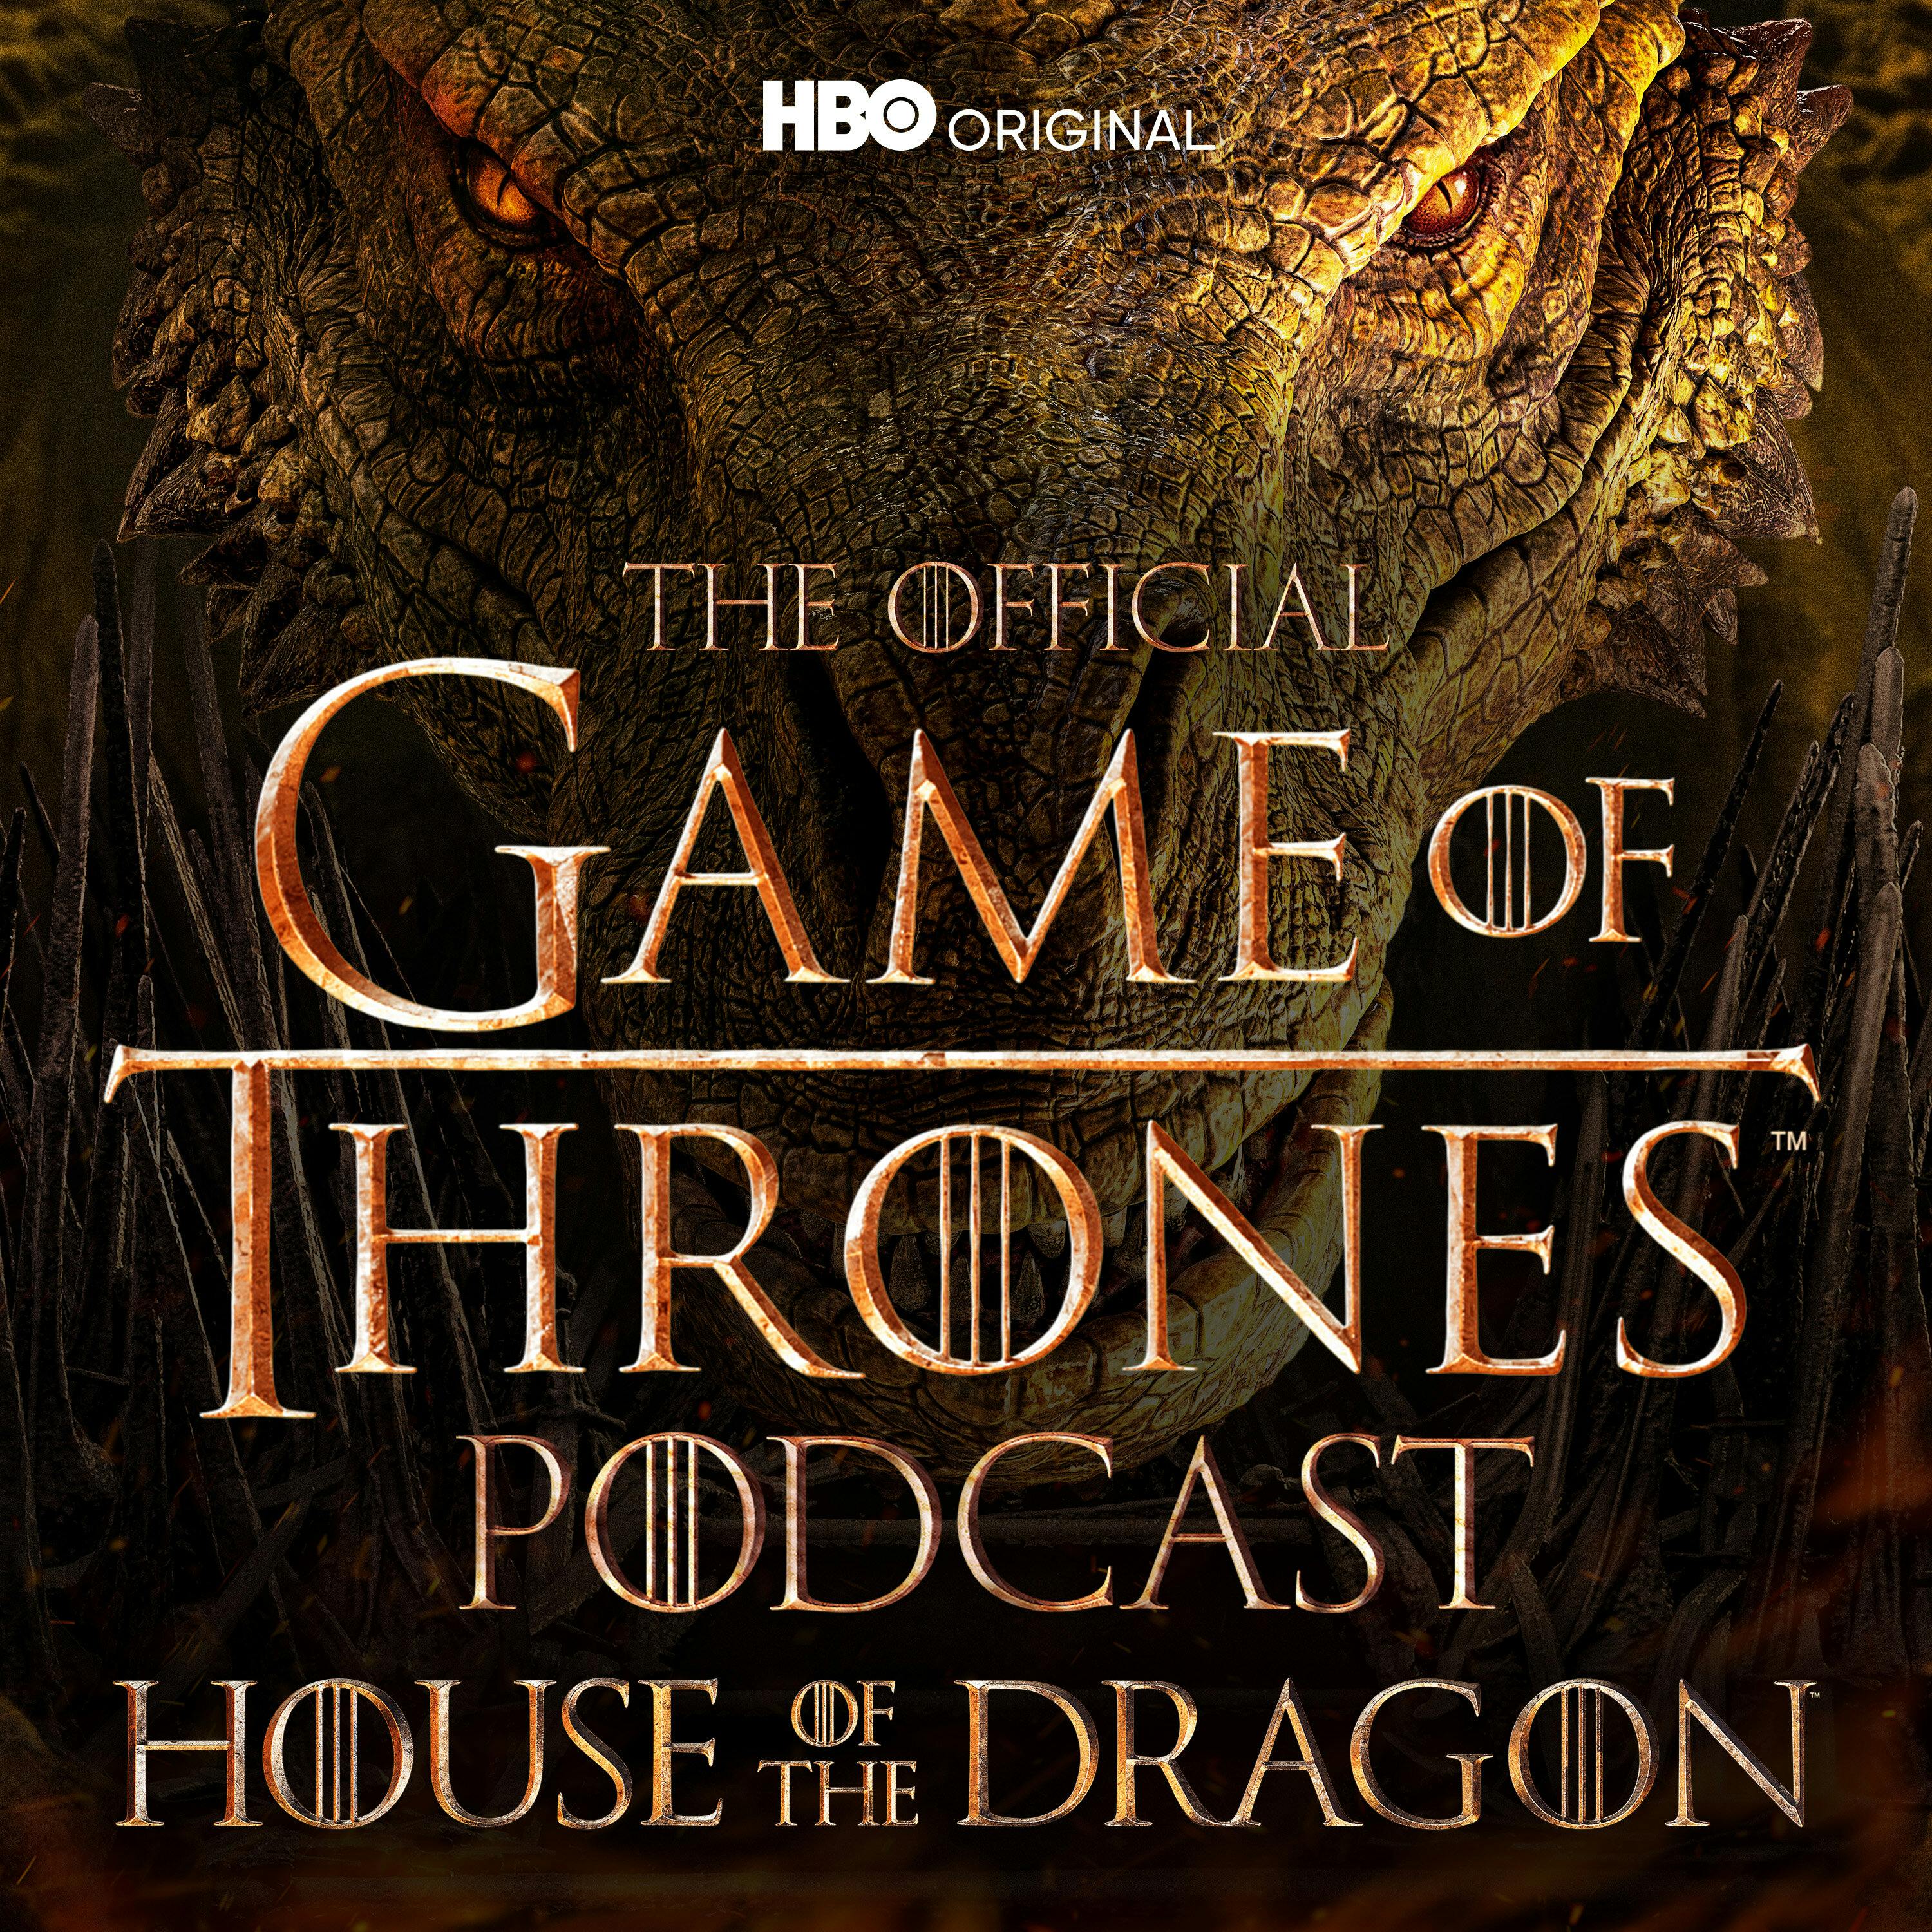 The Official Game of Thrones Podcast: House of the Dragon podcast show image